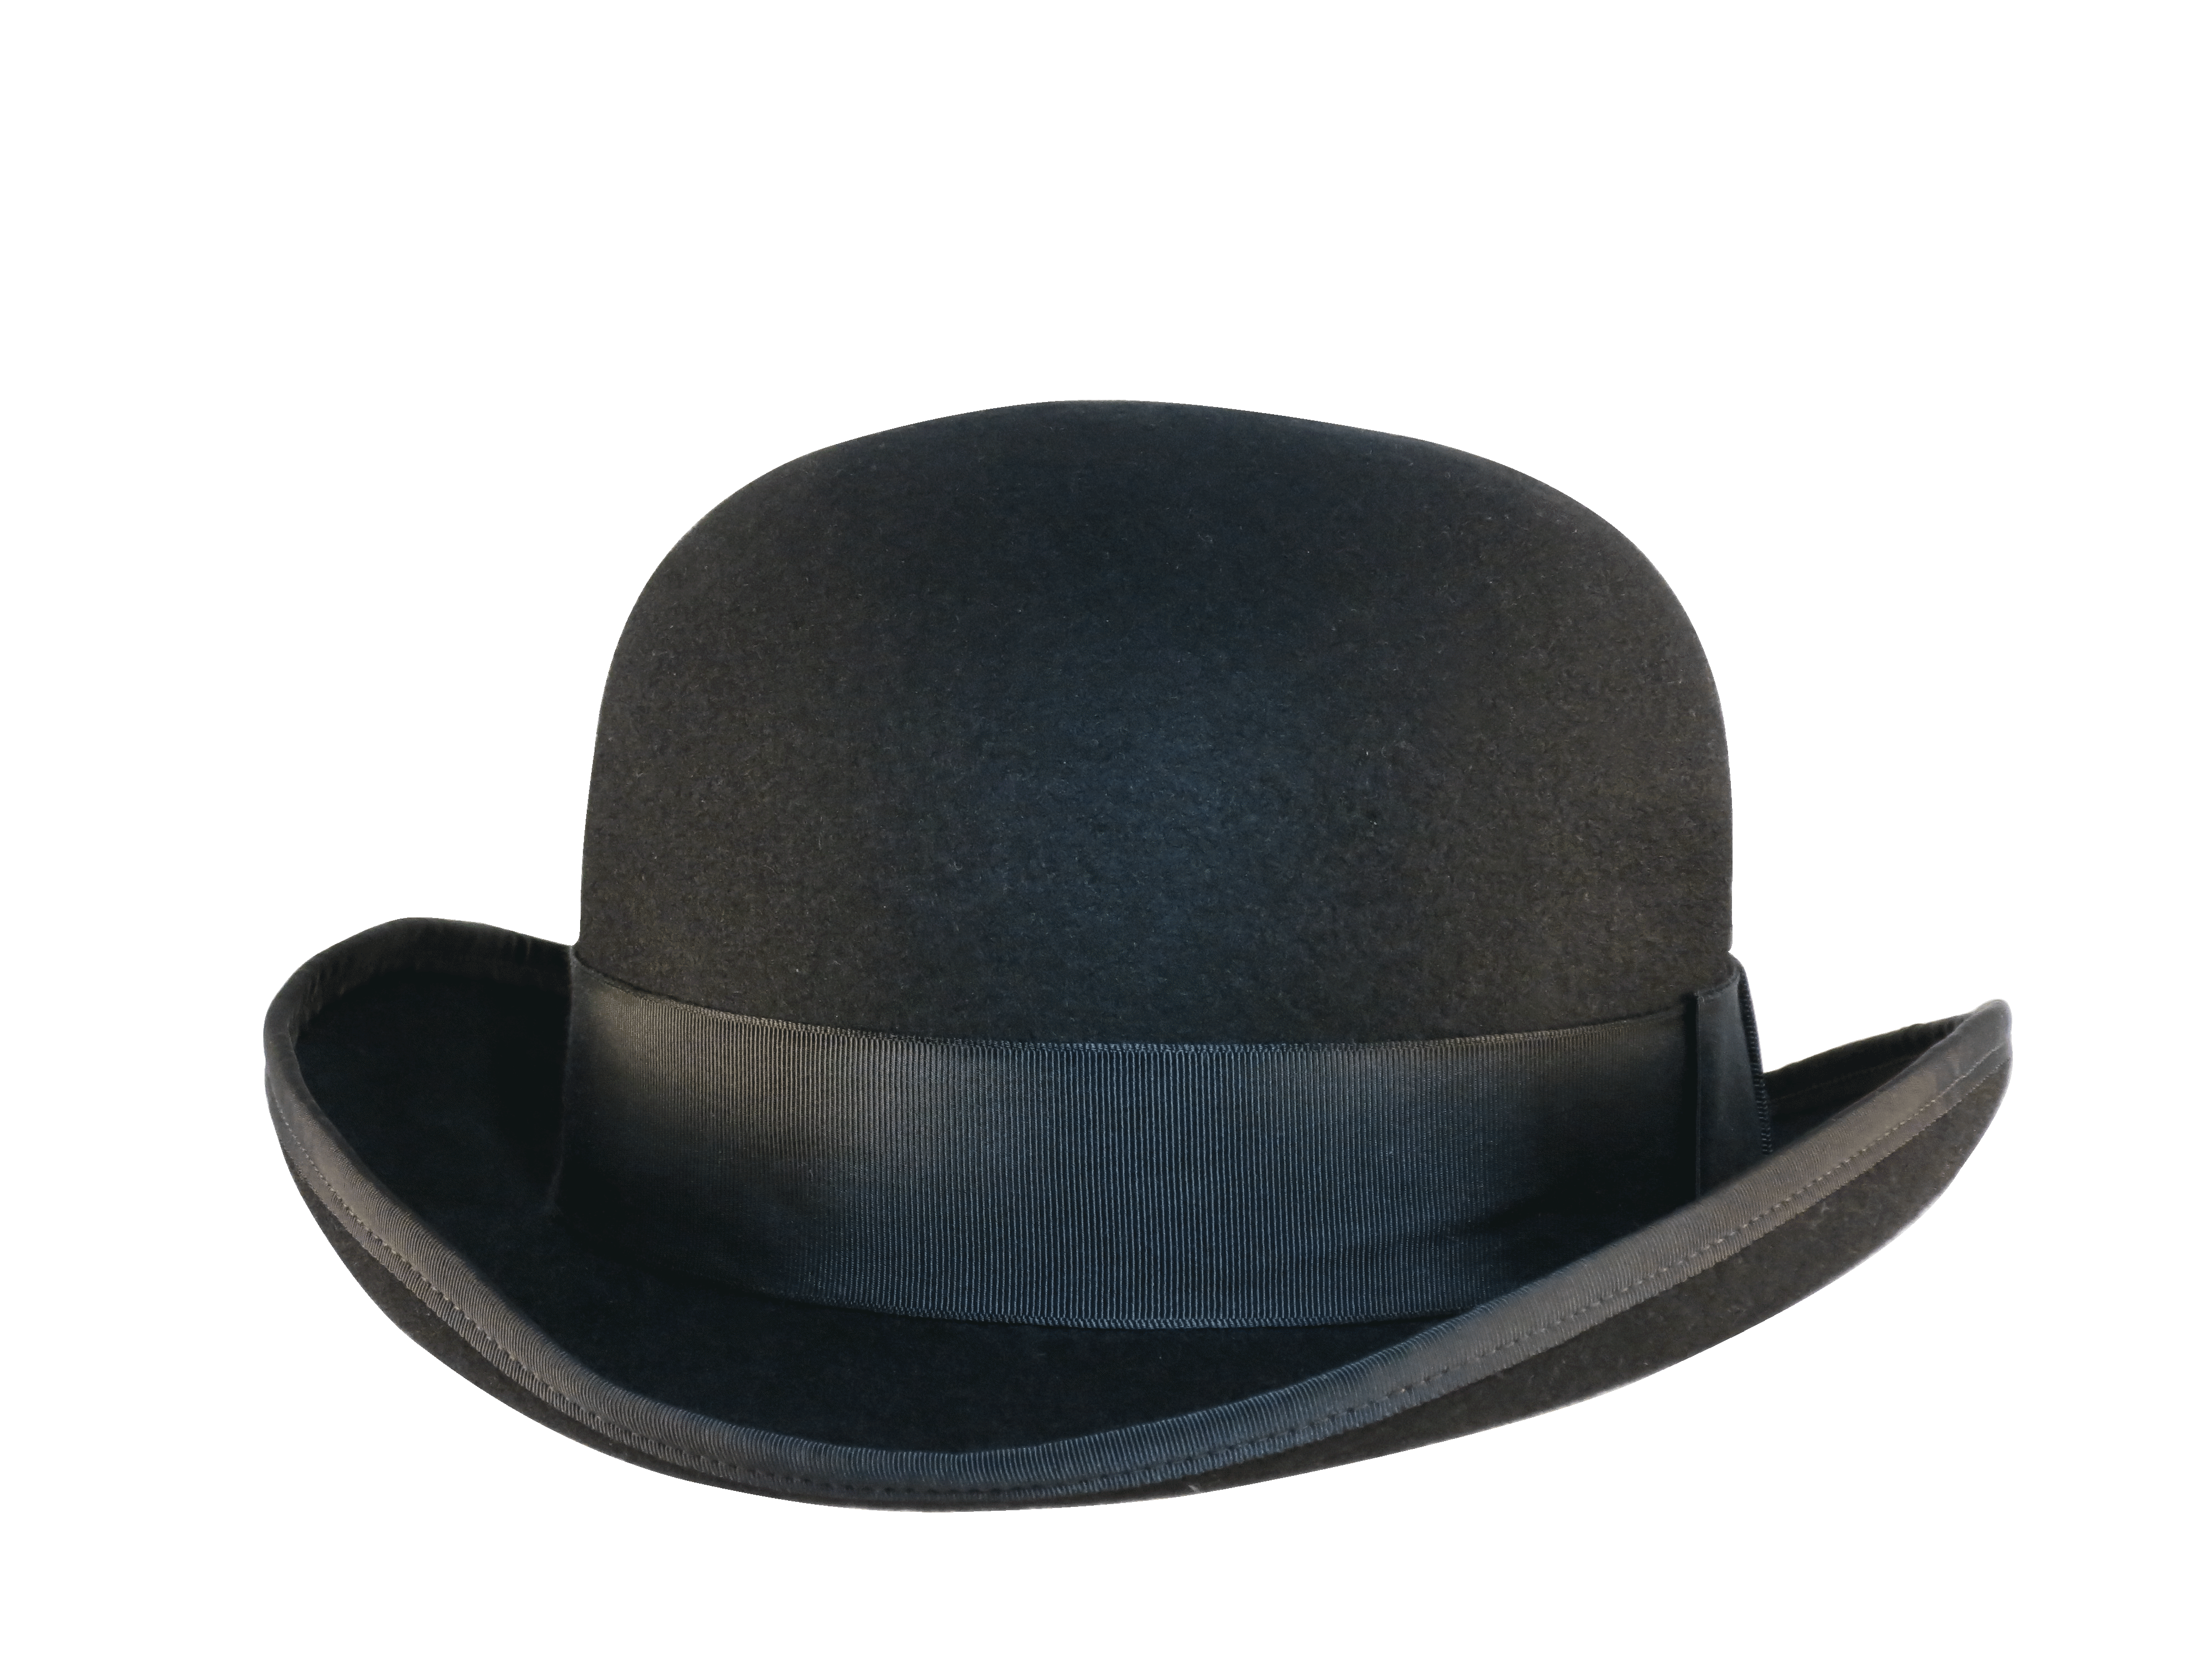 Derby and Bowler Hats from Top-Hats.com